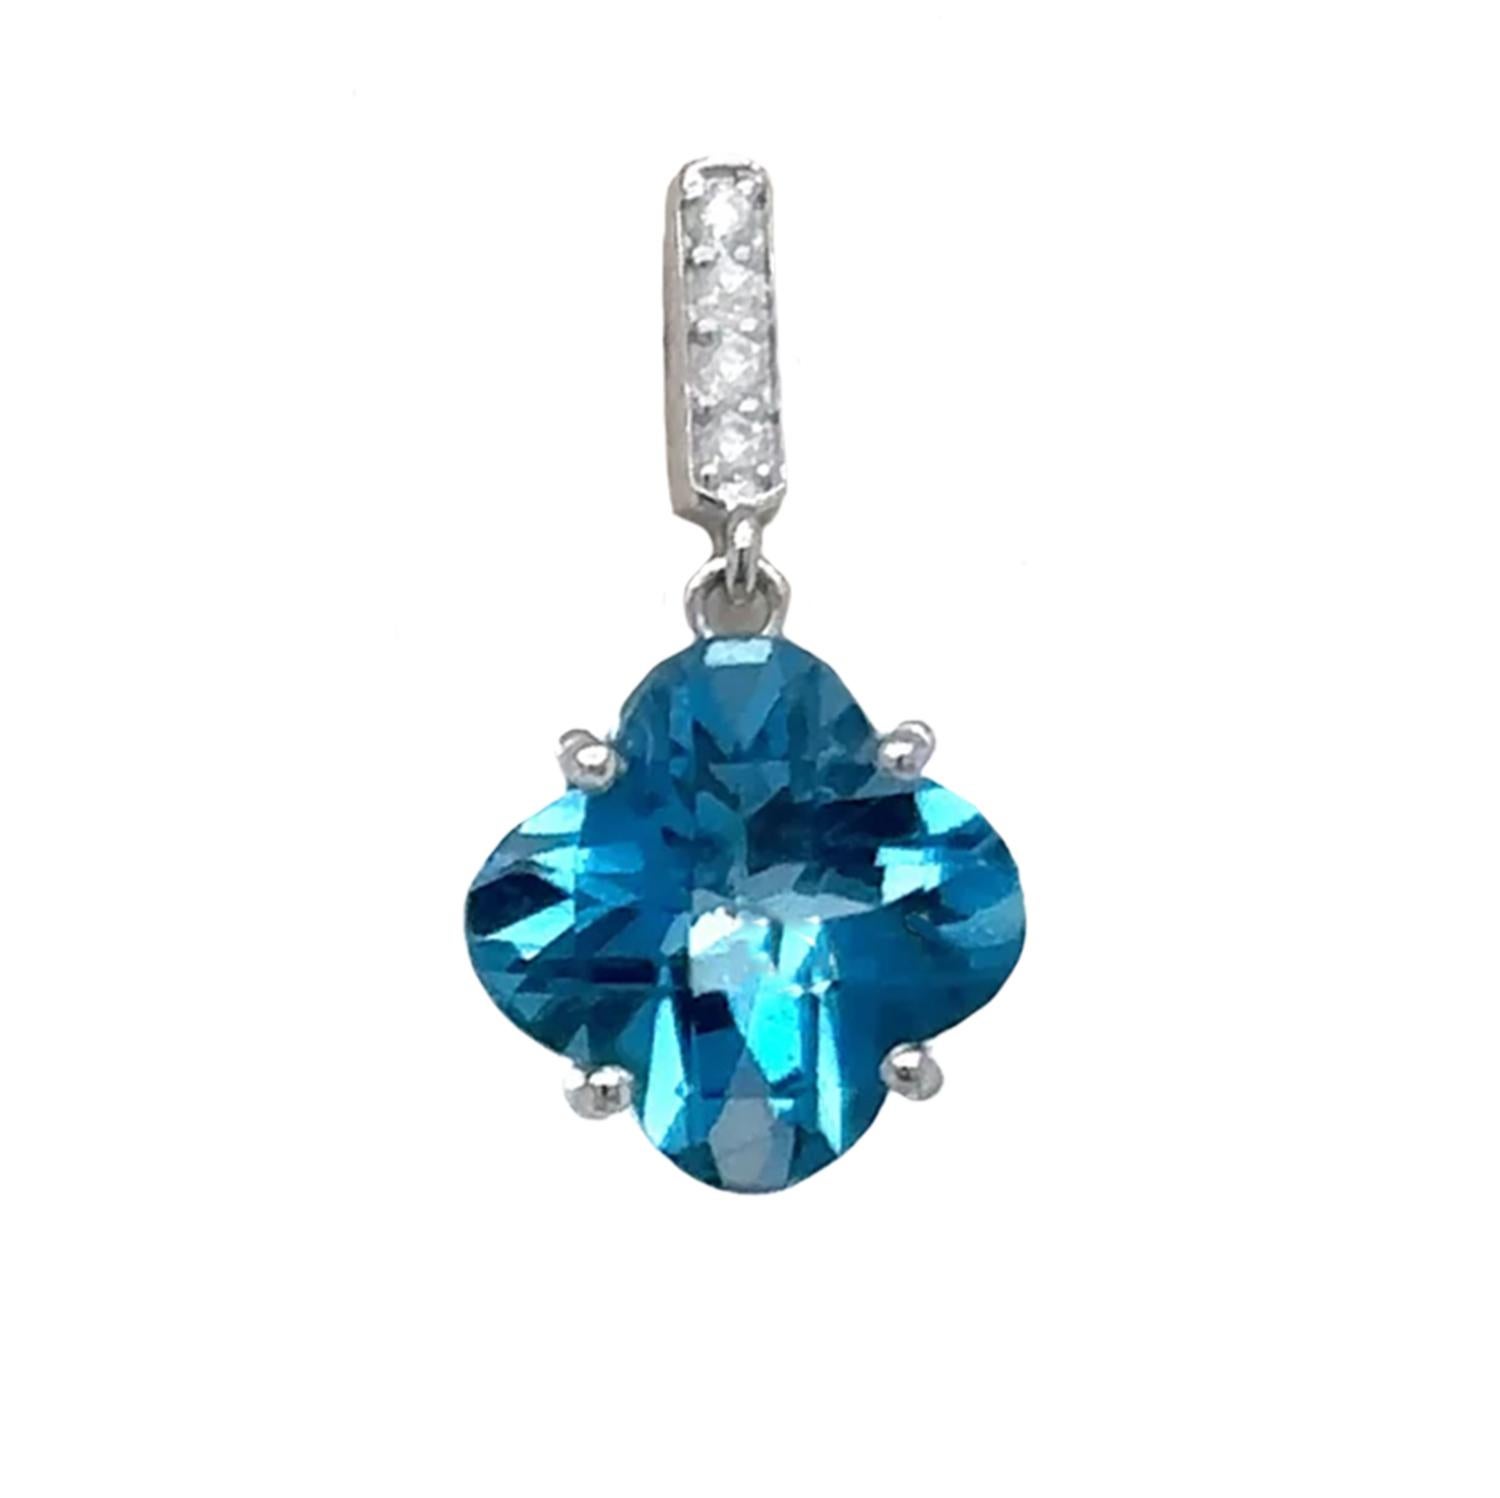 Mixed Cut Blue Topaz Dangle Earrings With Diamonds 5.48 Carats 18K White Gold For Sale